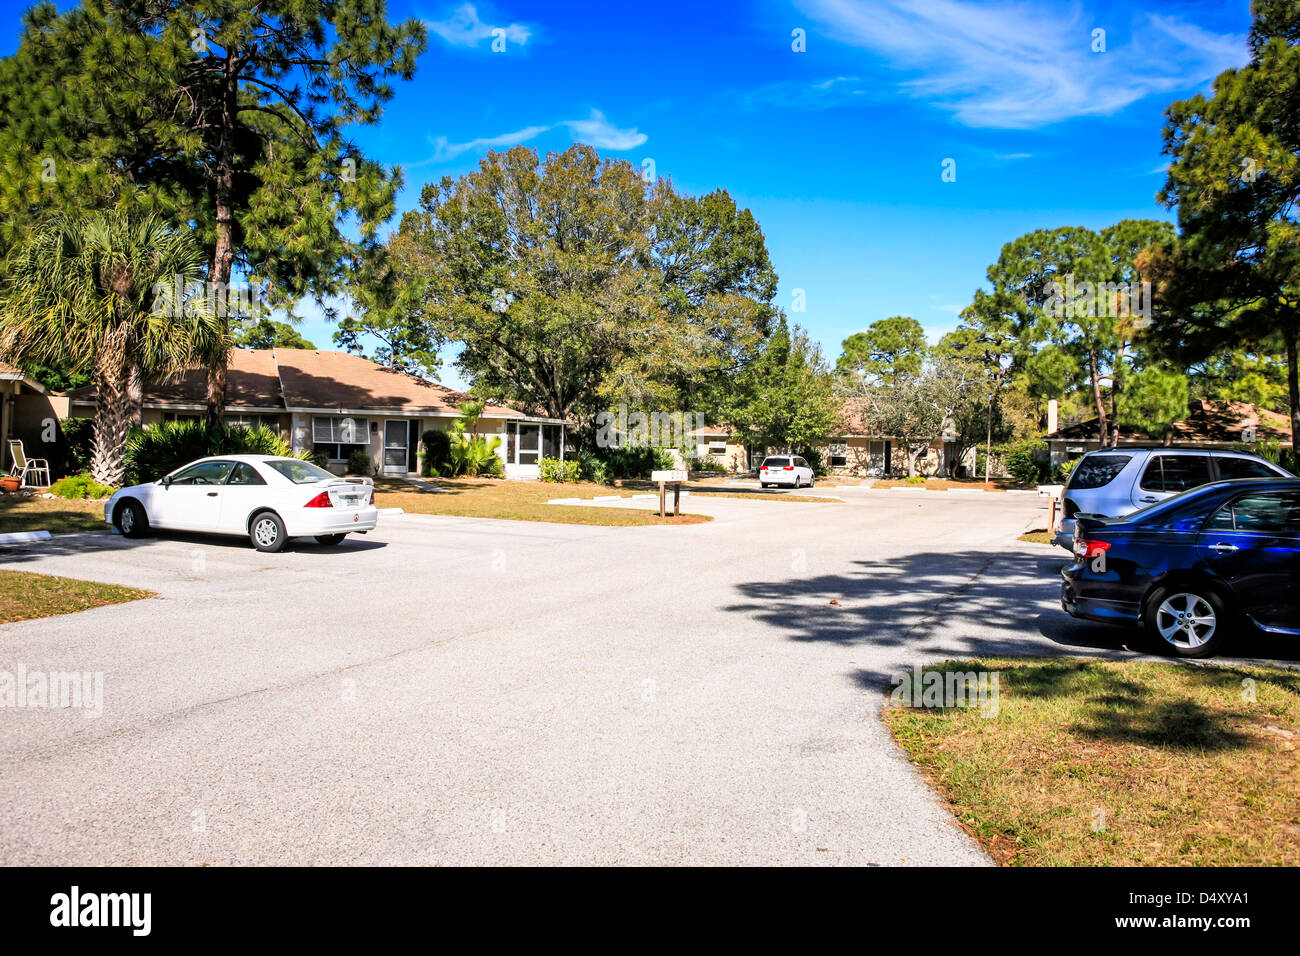 Street view and walled housing development in Sarasota Florida Stock Photo